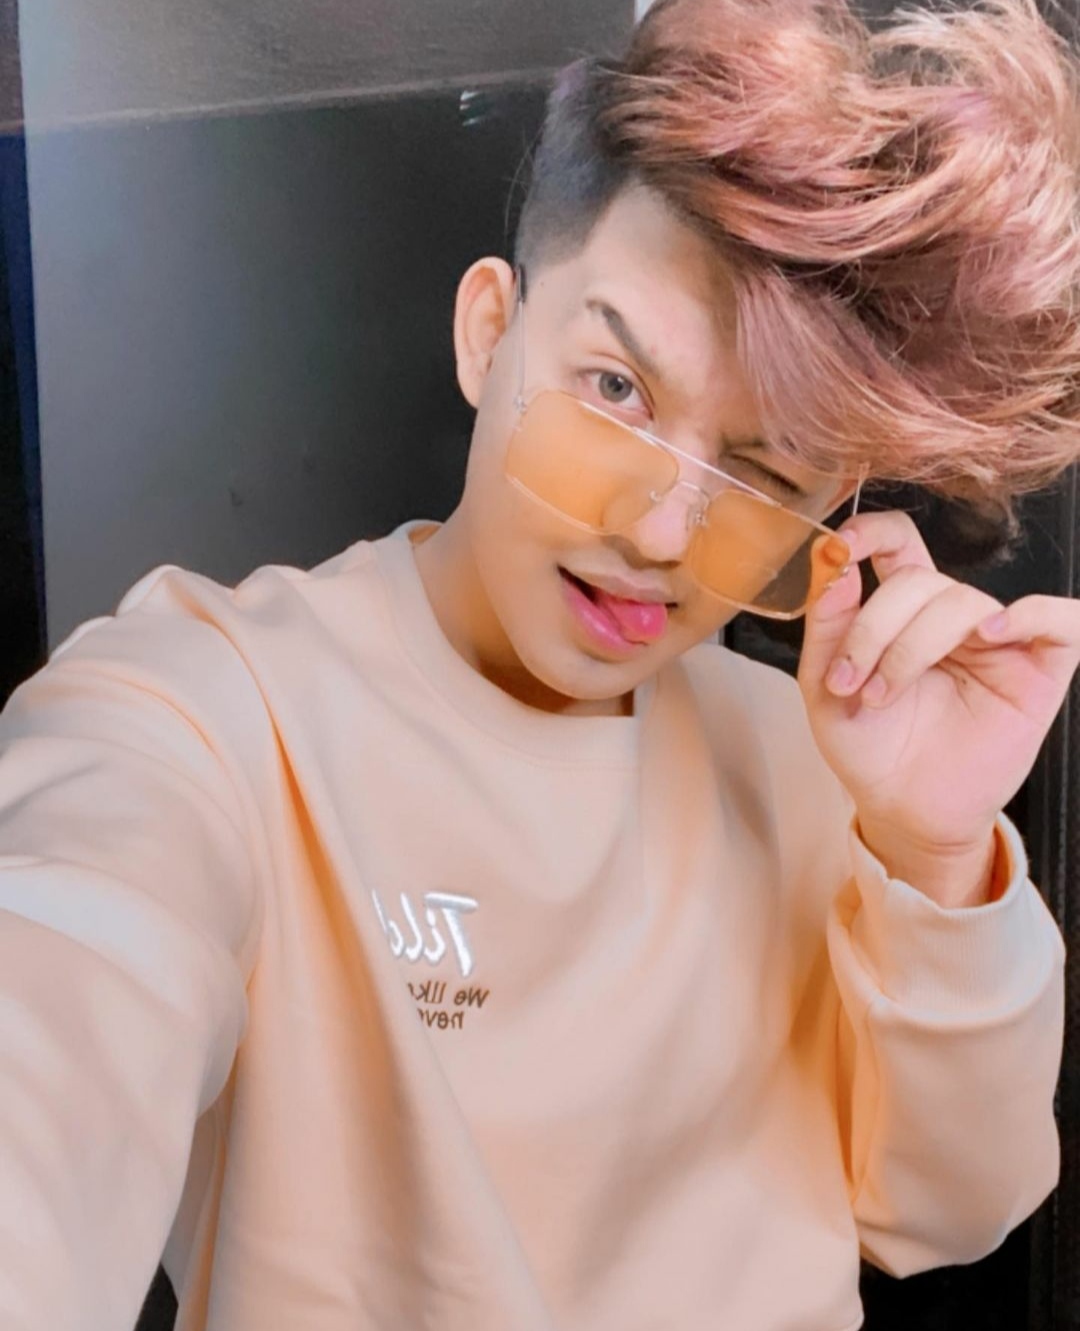 Boys Out There! Style Your Hair & Dye Your Hair Just Like Riyaz Aly To  Impress Your Girl | IWMBuzz